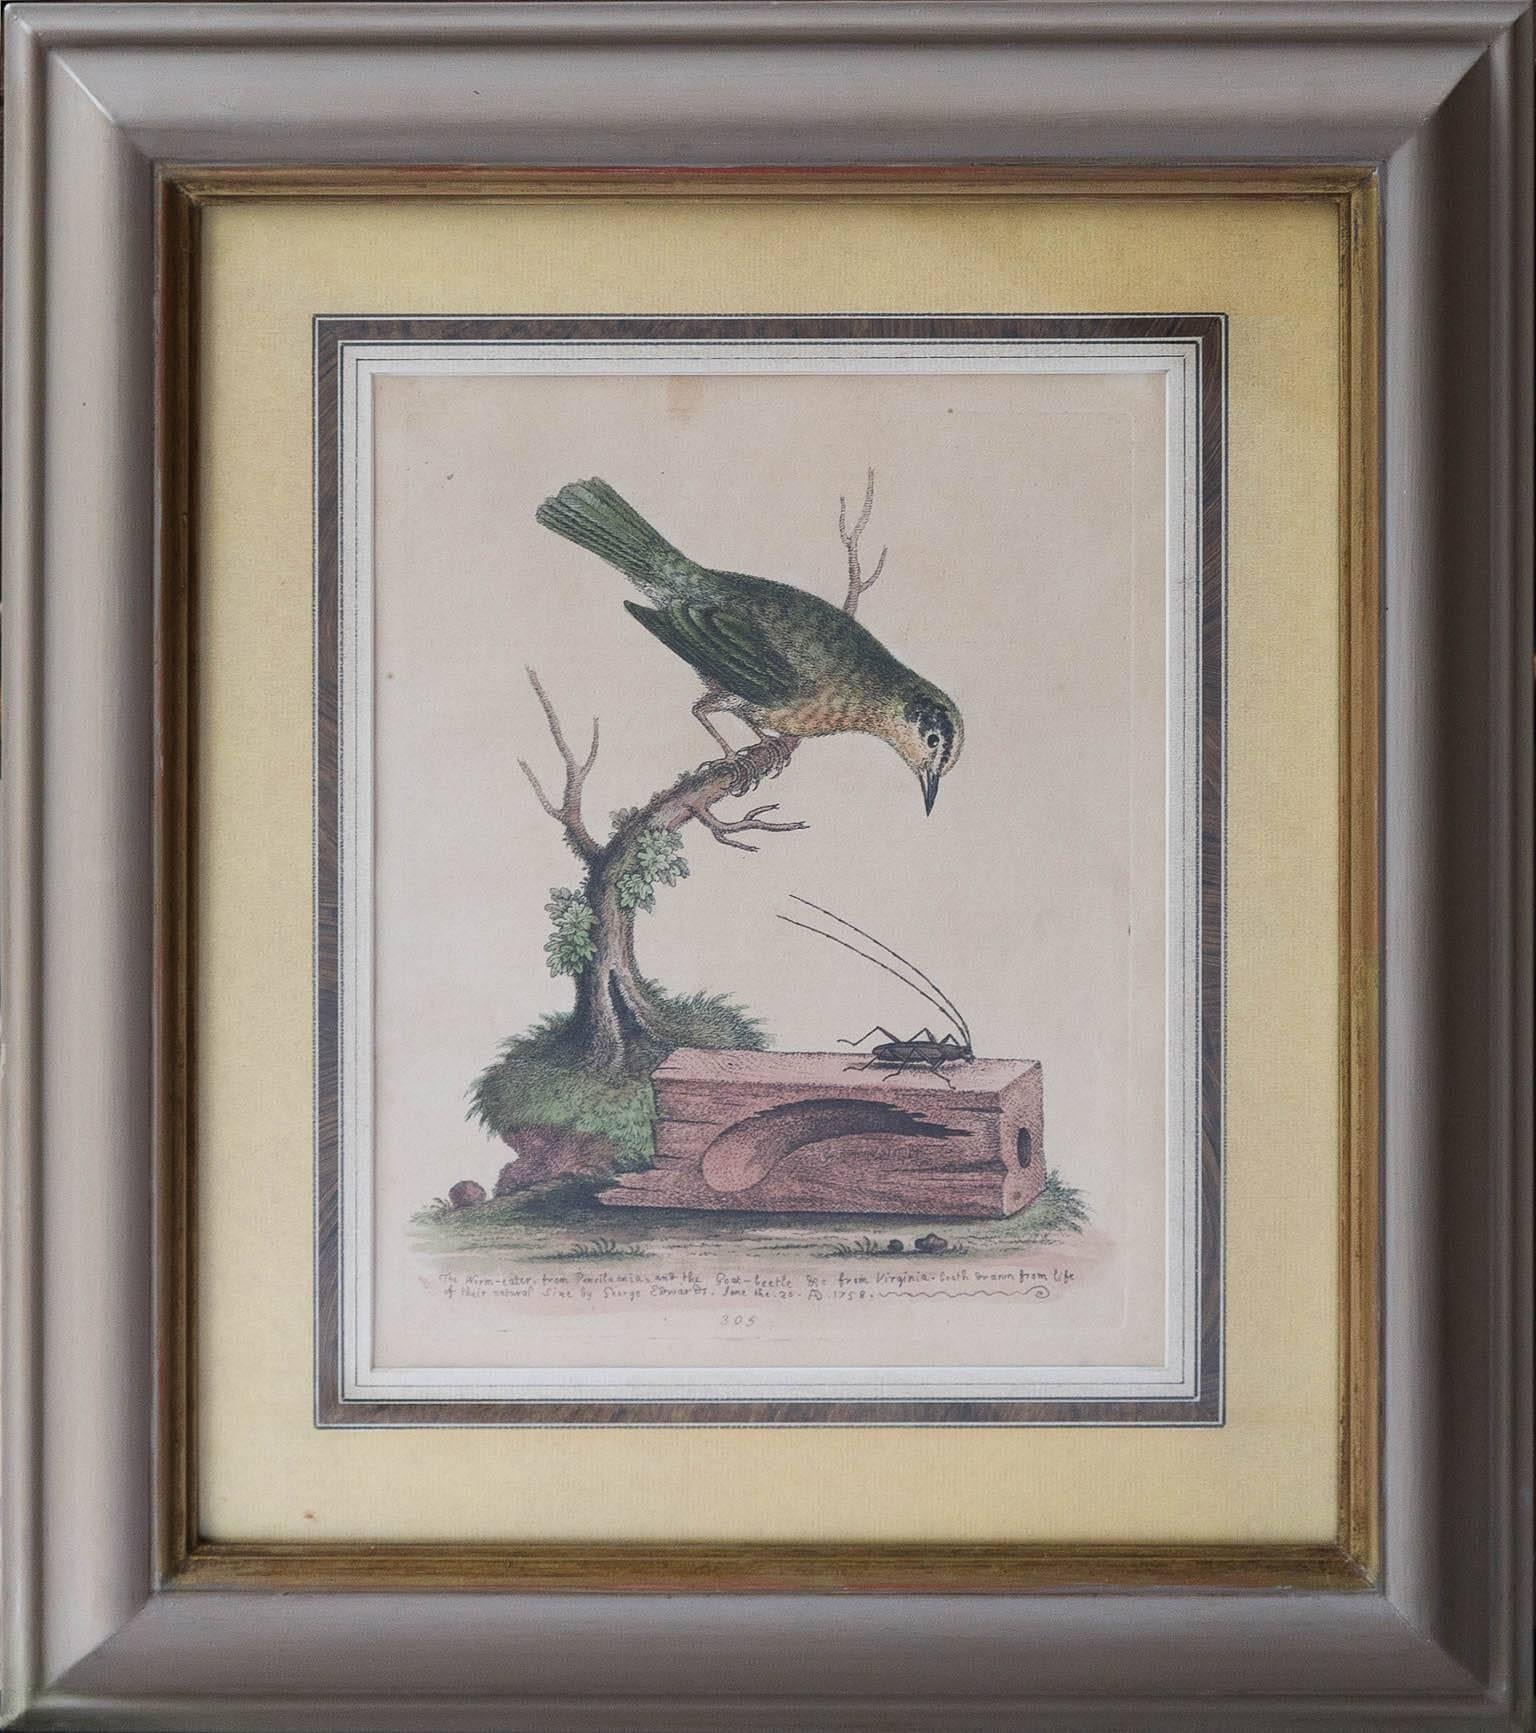 Six Framed English 18th Century Bird Prints After George Edwards, Published 1740 1